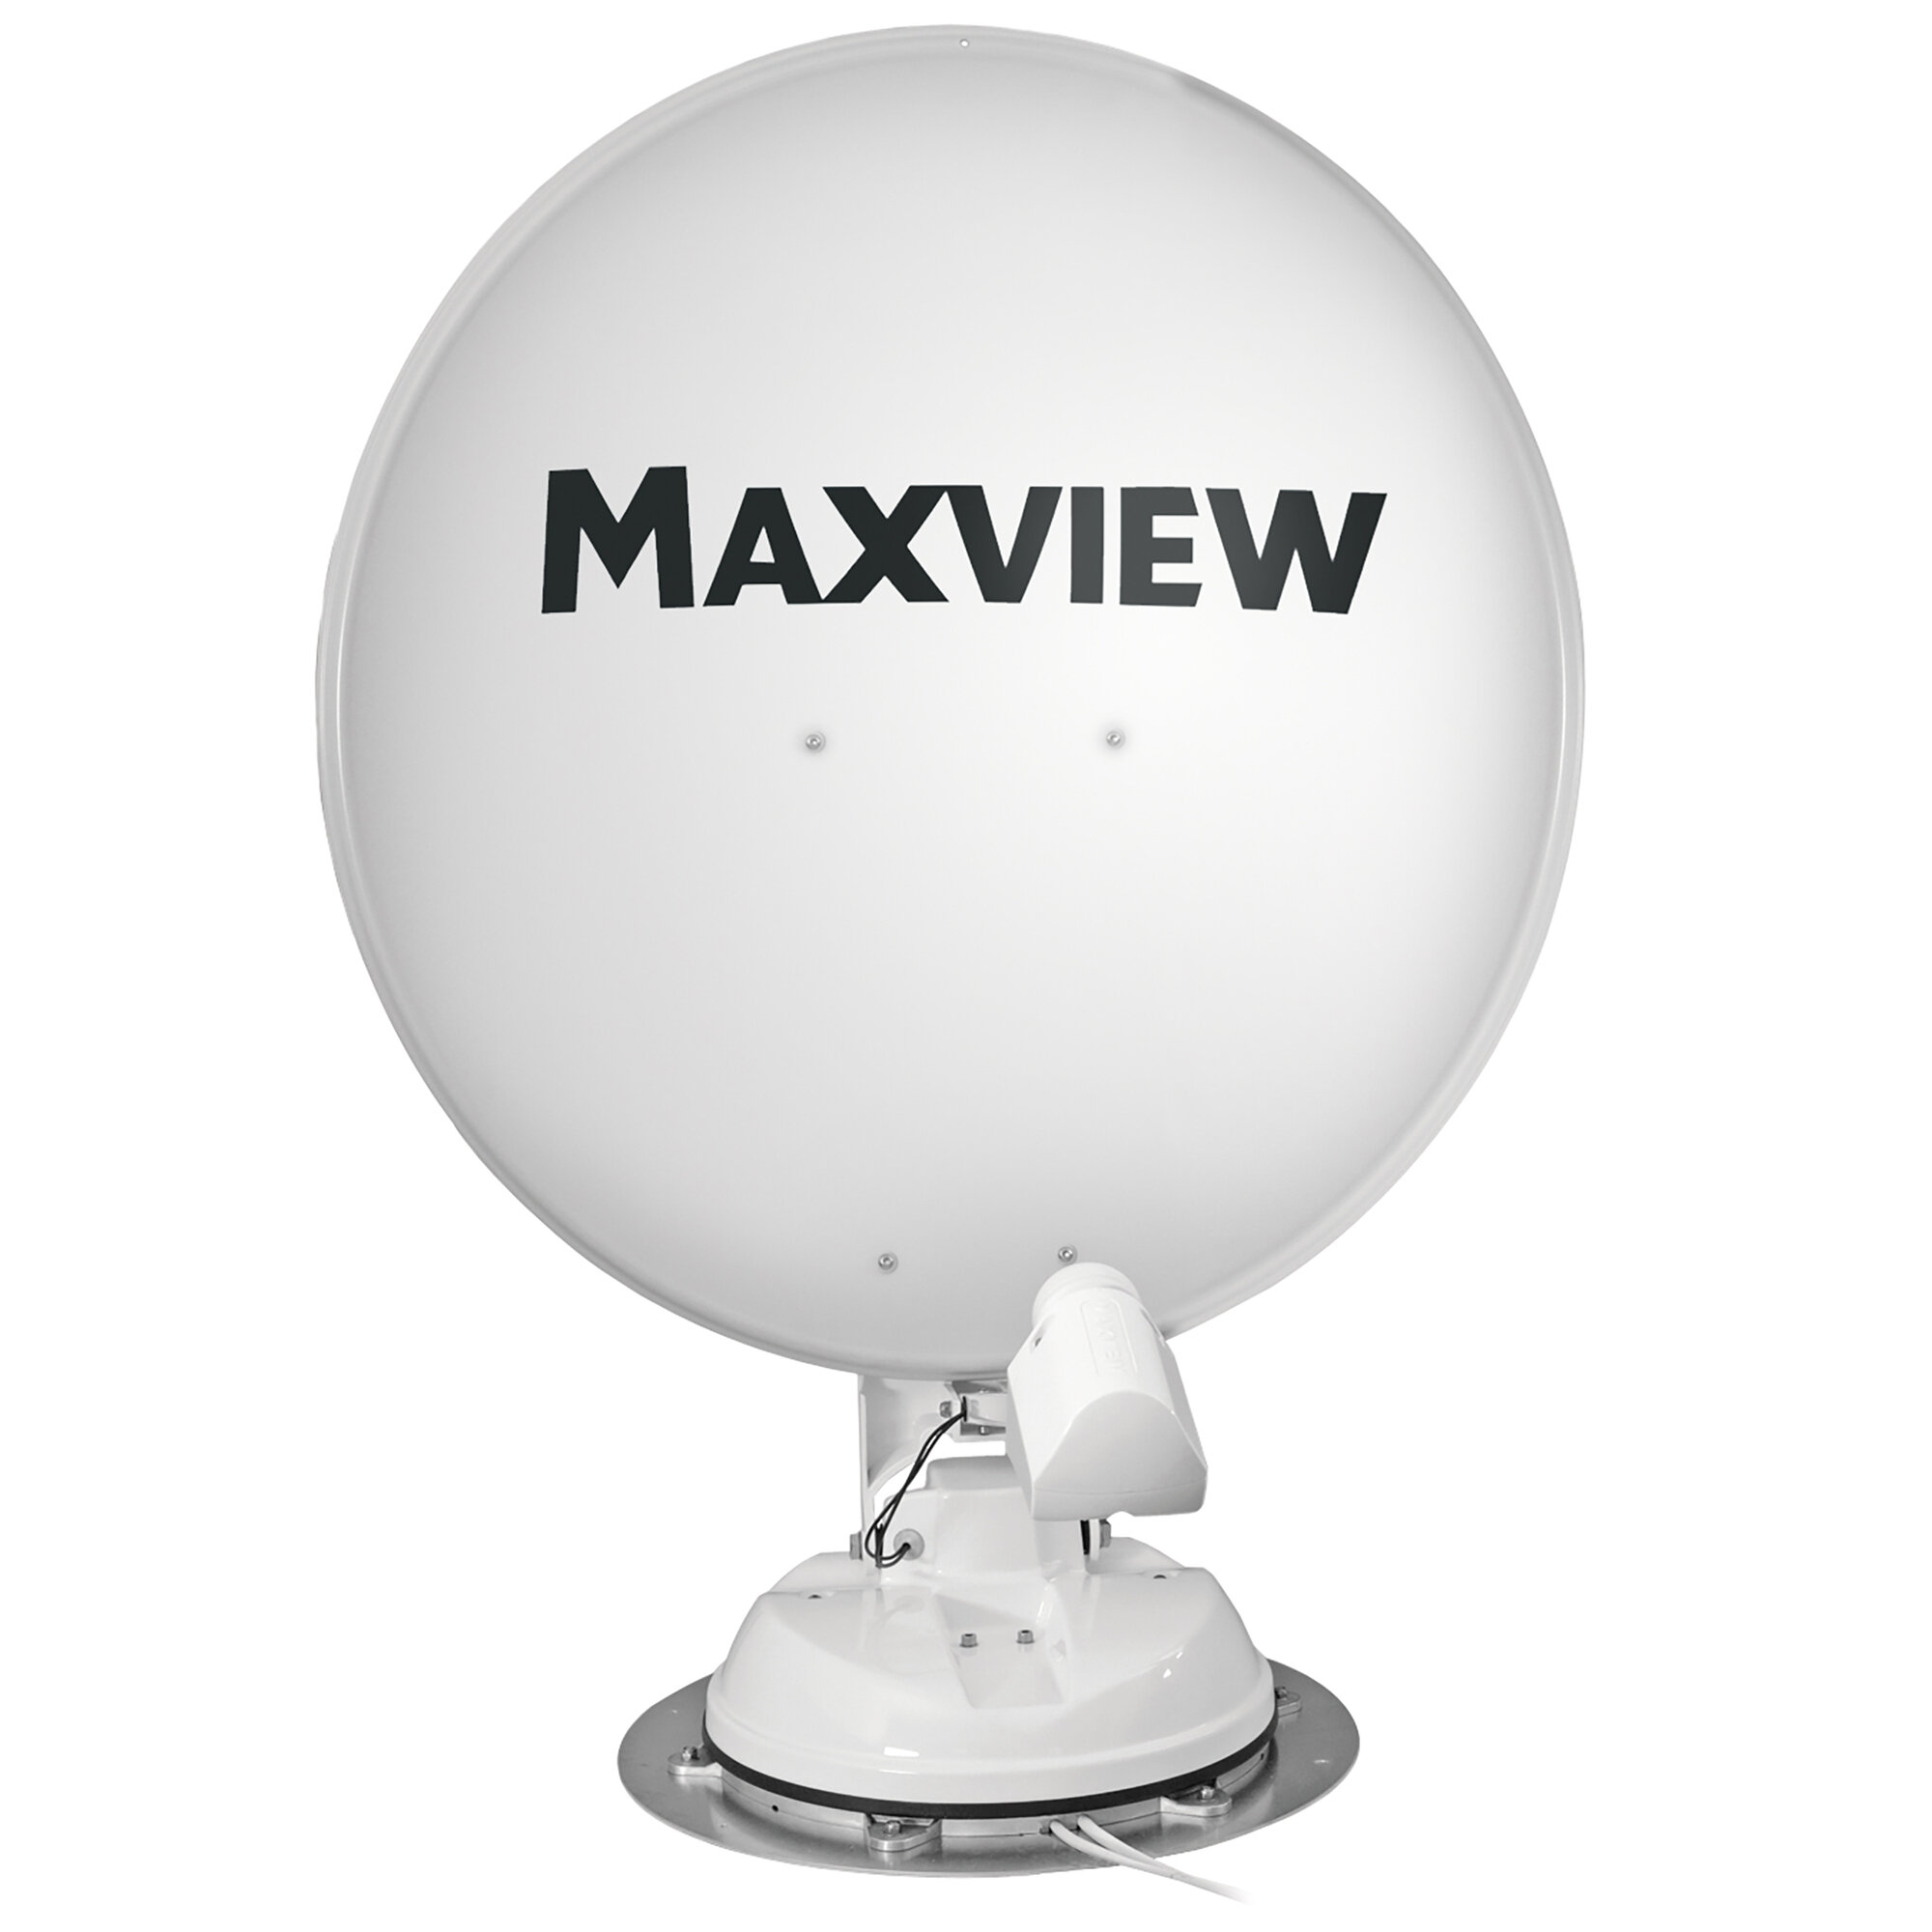 Maxview Twister